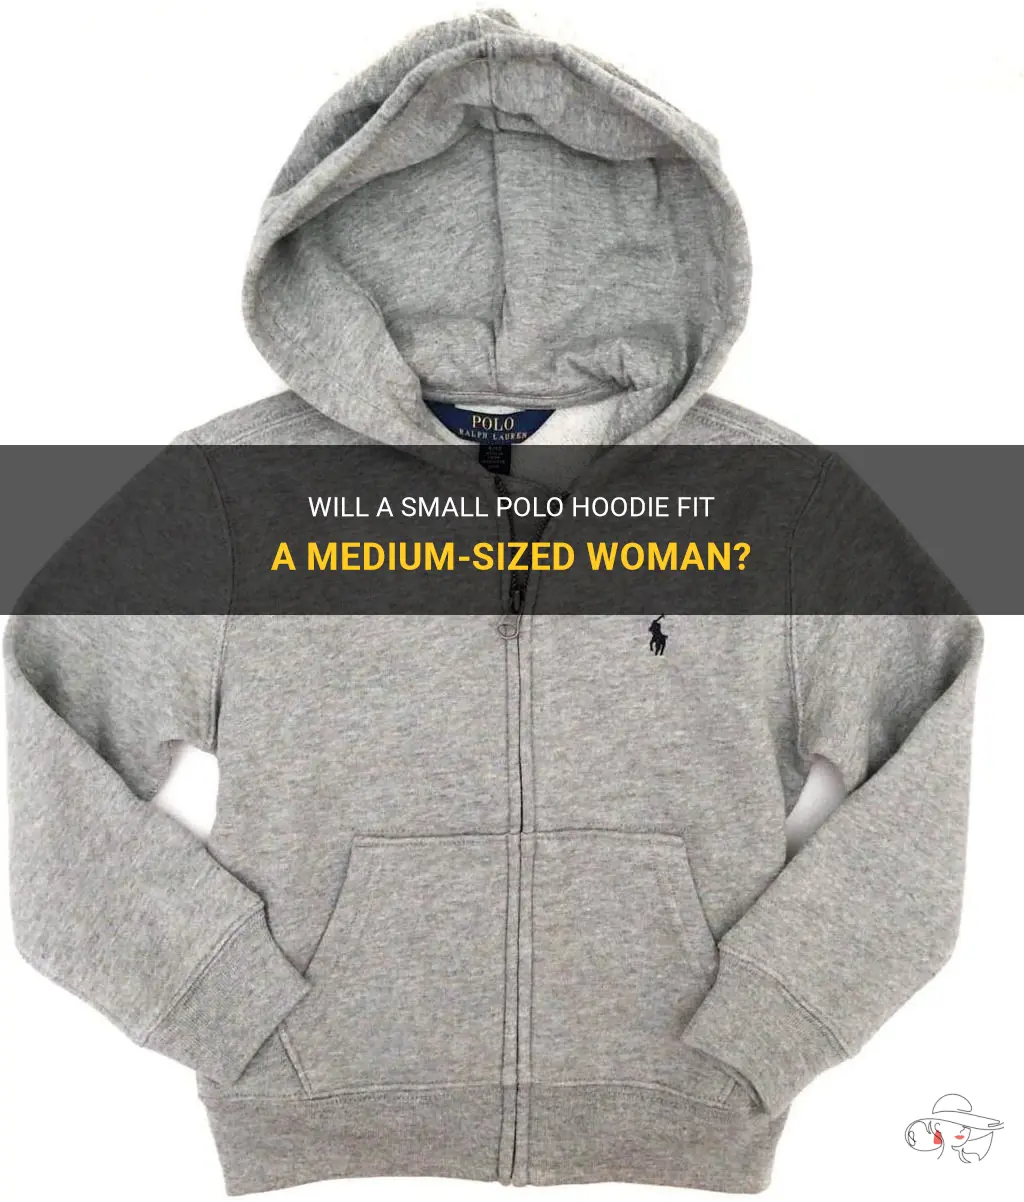 can a small polo hoodie fit a medium women